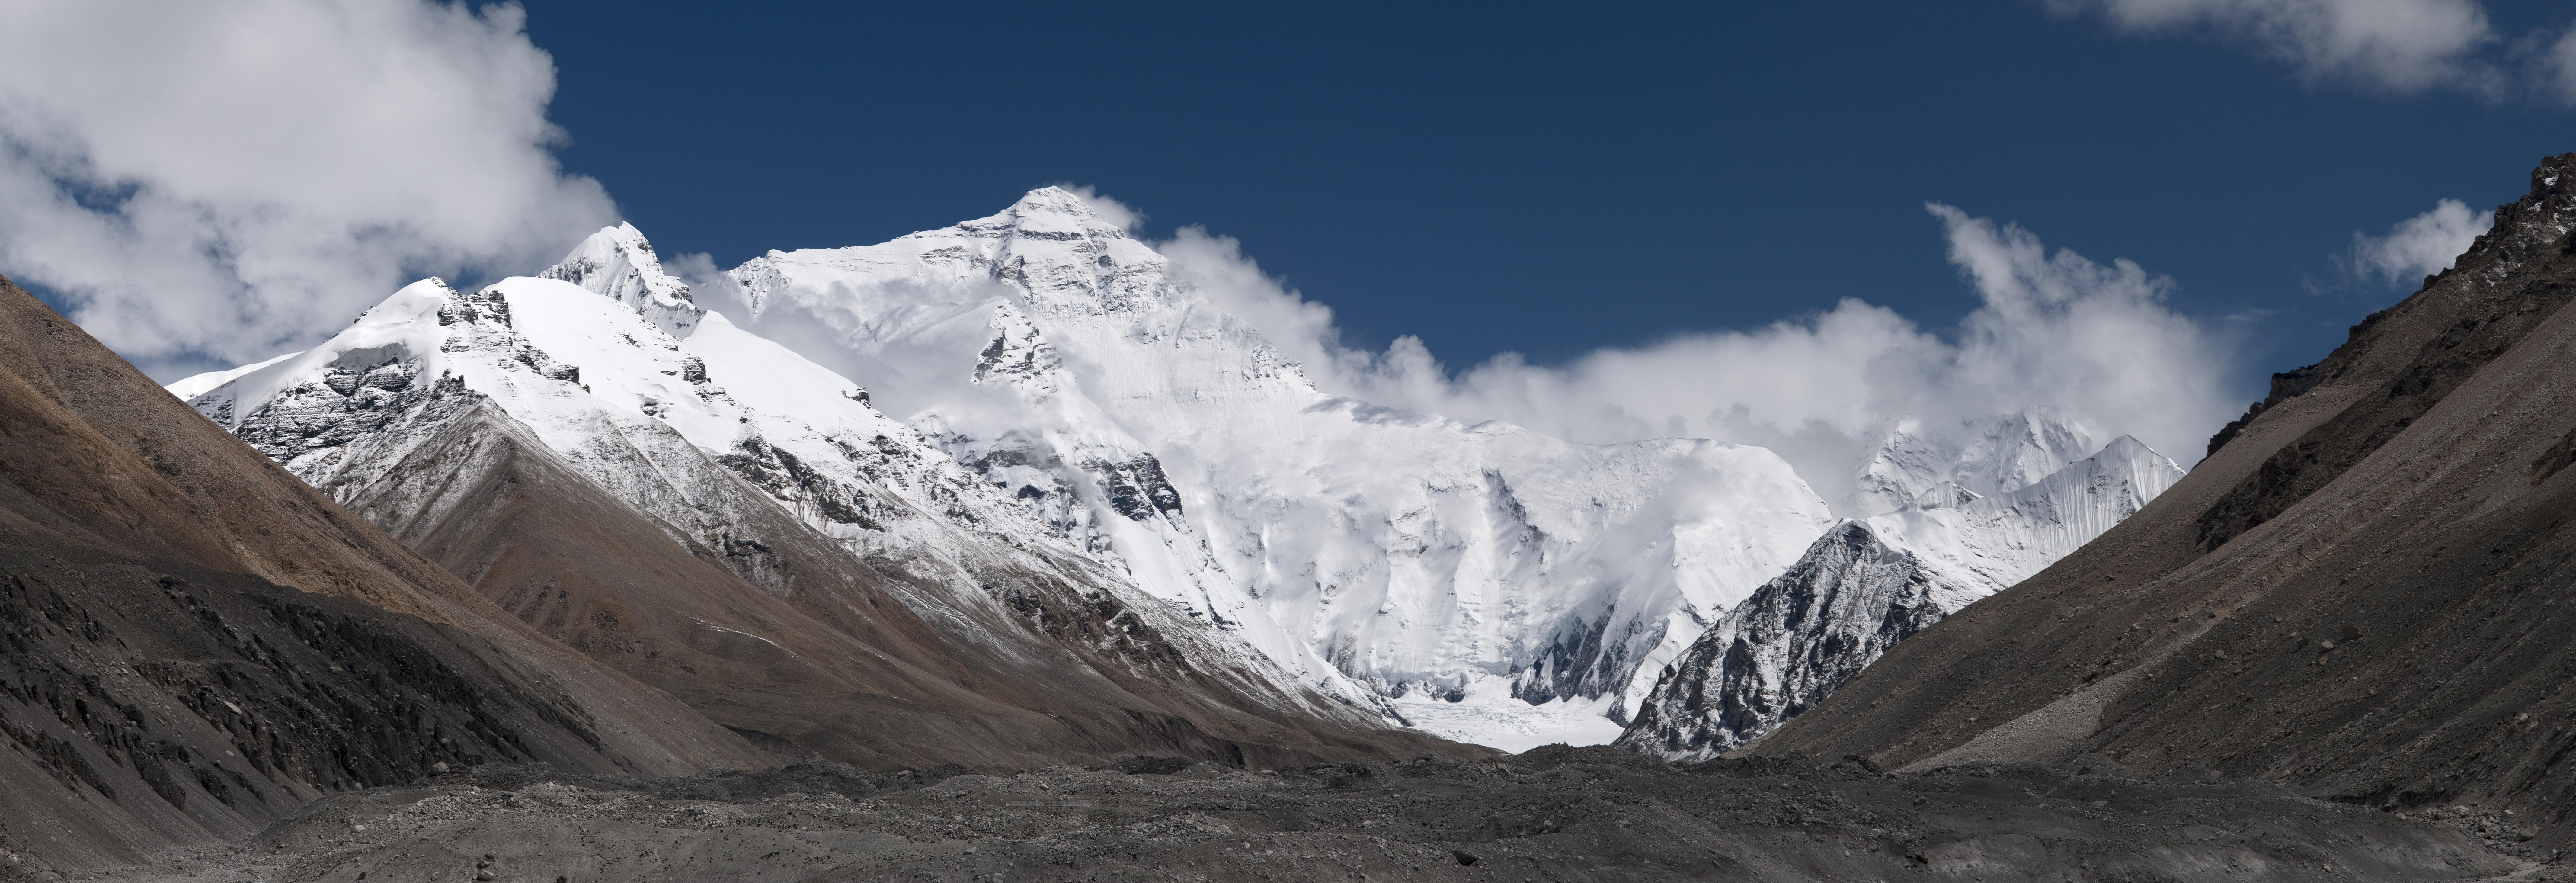 Everest 4K wallpaper for your desktop or mobile screen free and easy to download